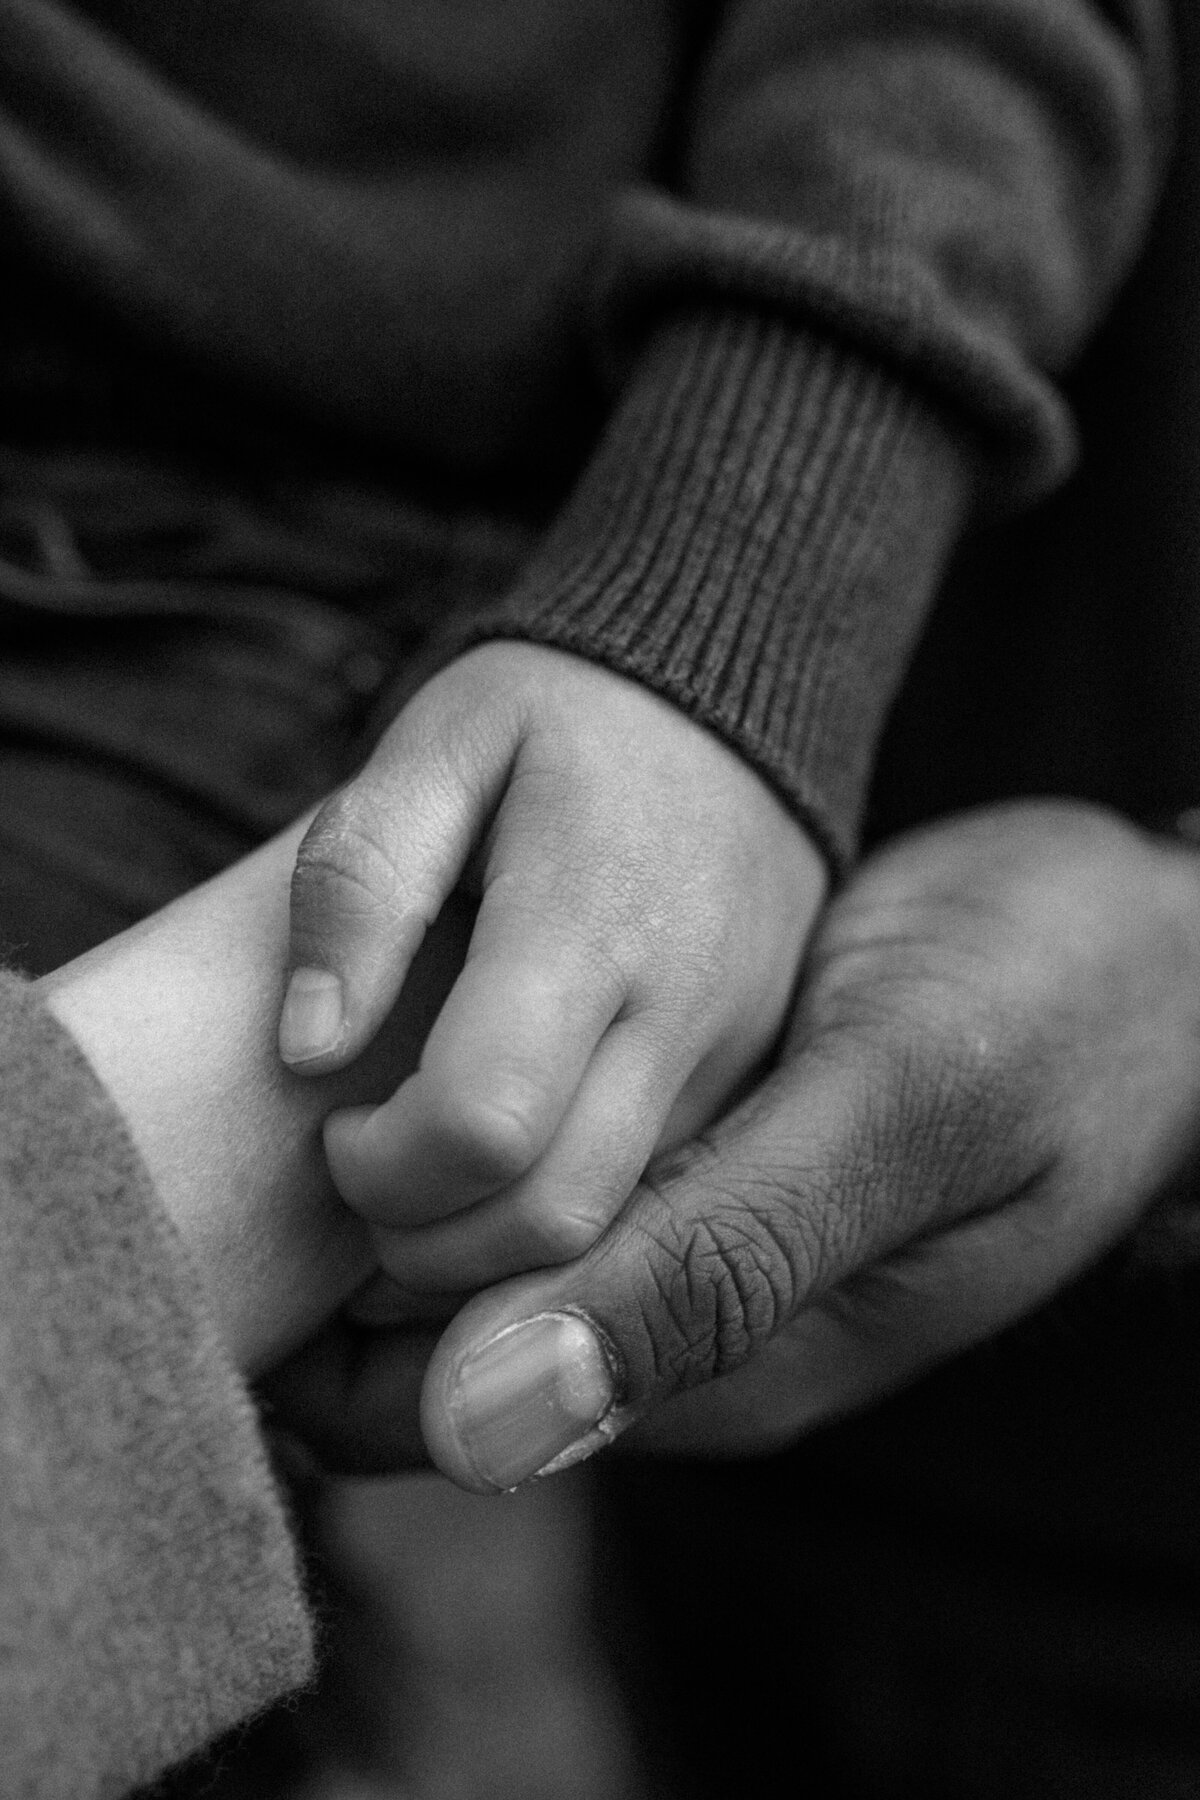 Close up detail of a young toddler's hands resting on his dad's larger hands.